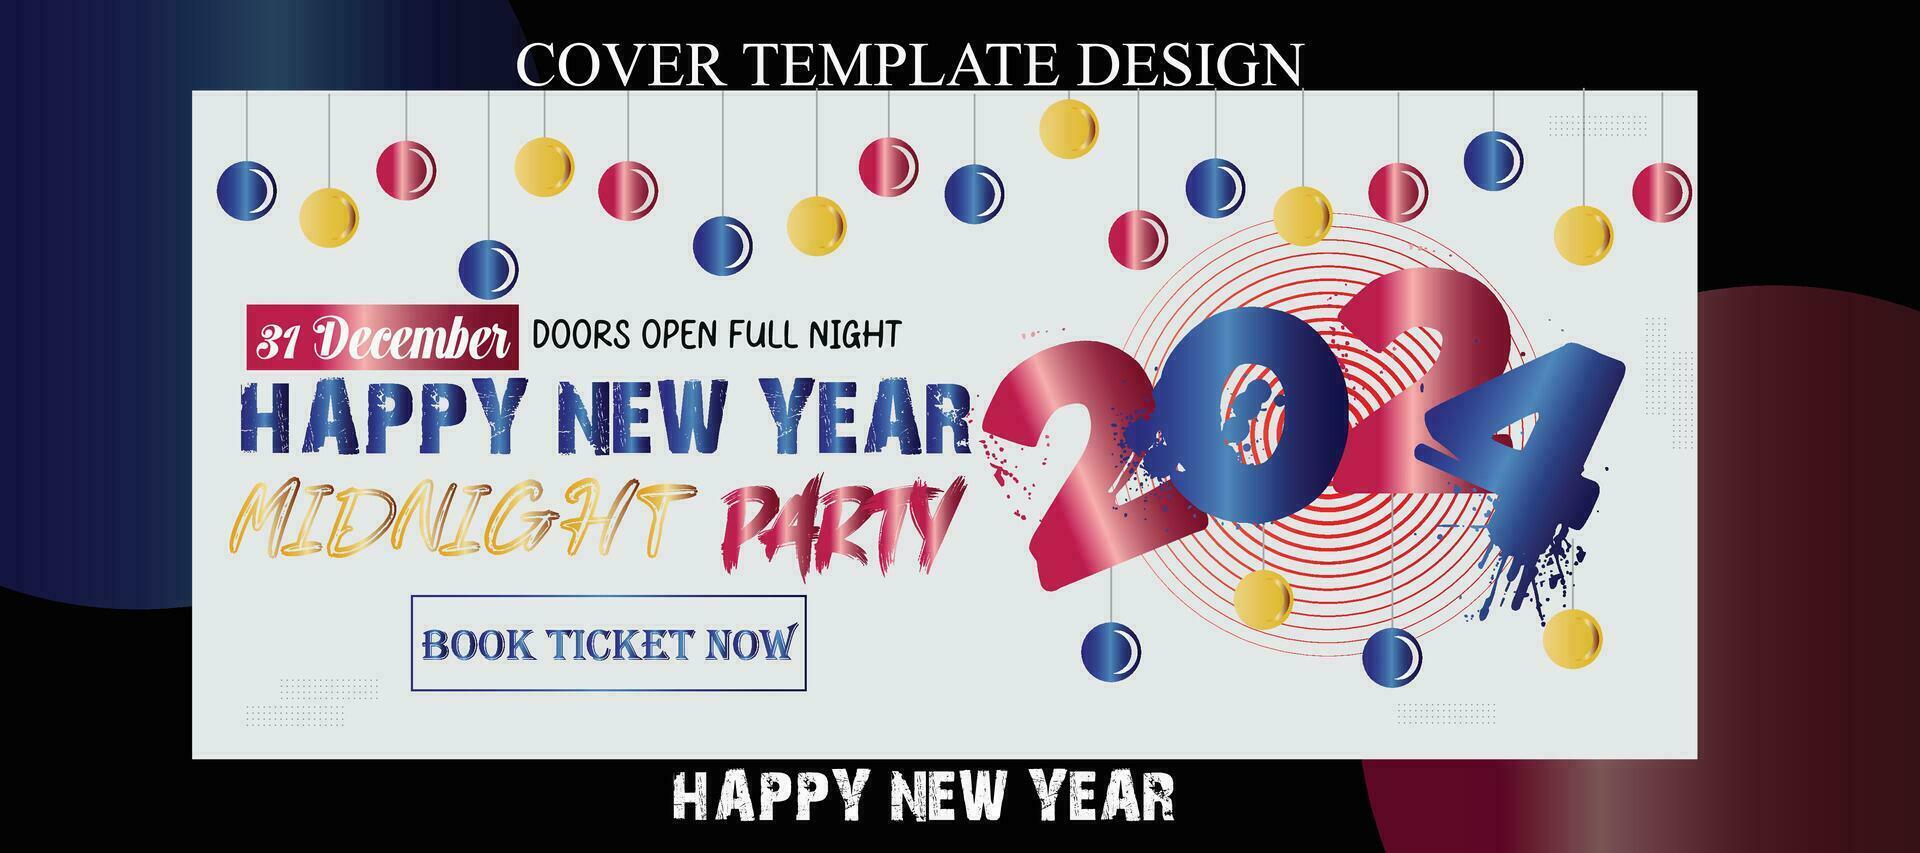 New Year Cover Photo Template Design vector